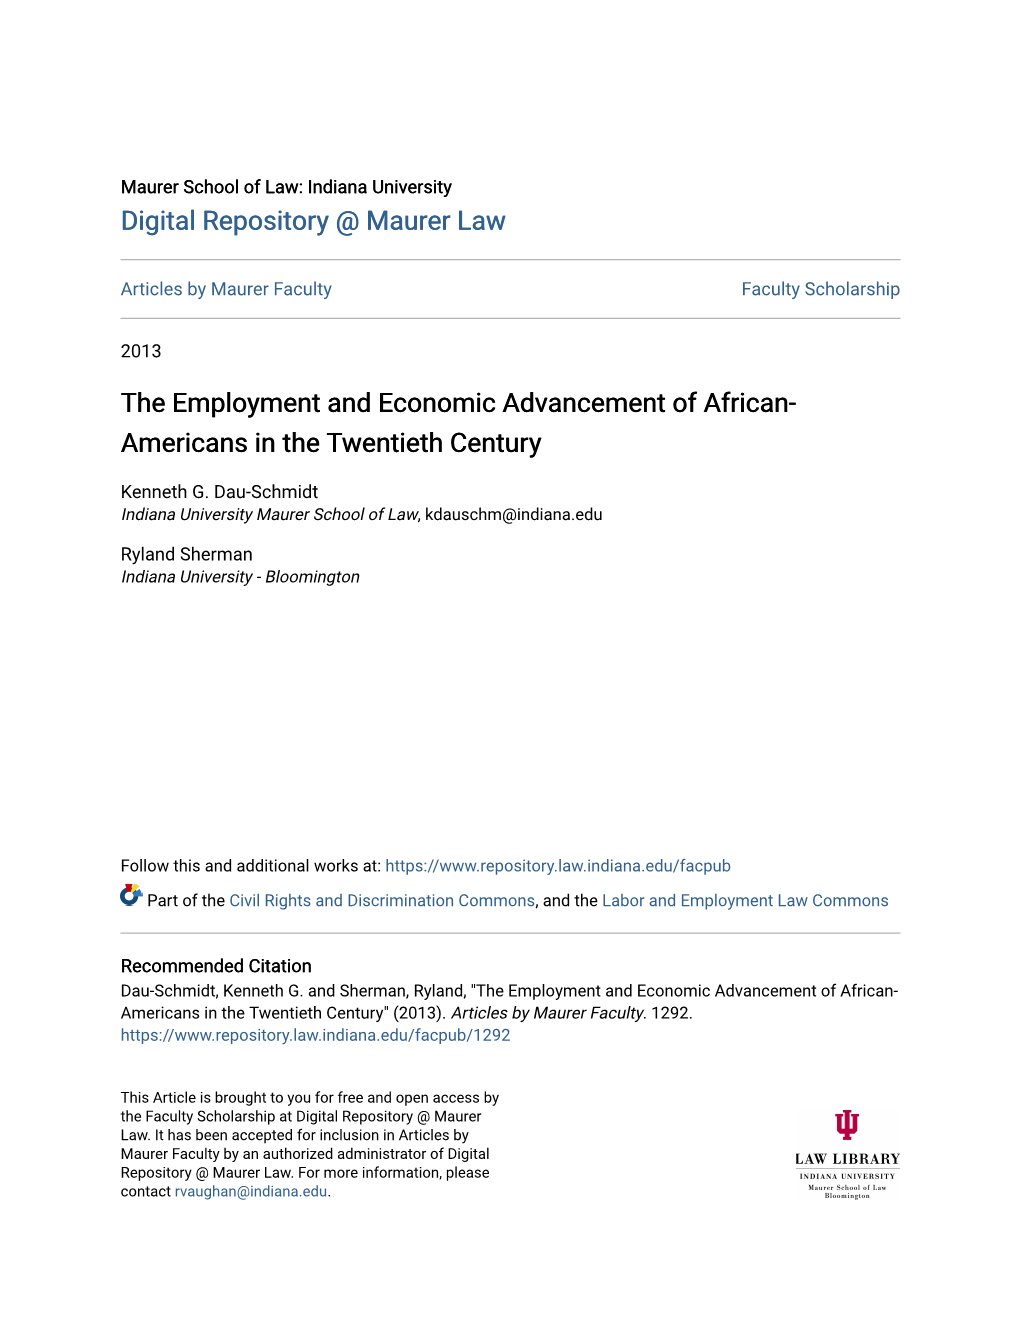 The Employment and Economic Advancement of African-Americans